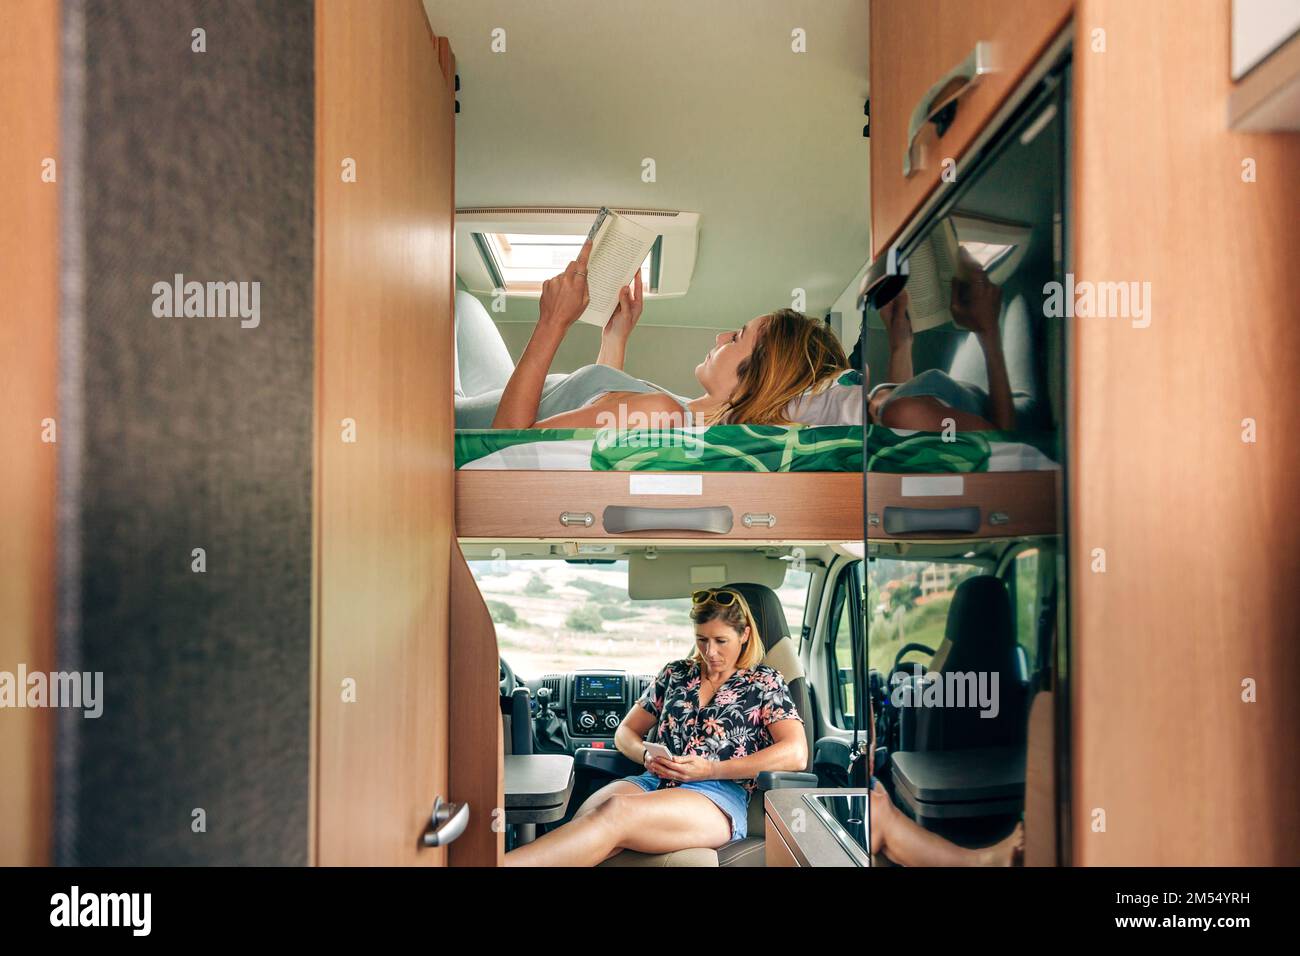 Woman lying on camper van bunk bed reading book while her friend looking mobile Stock Photo